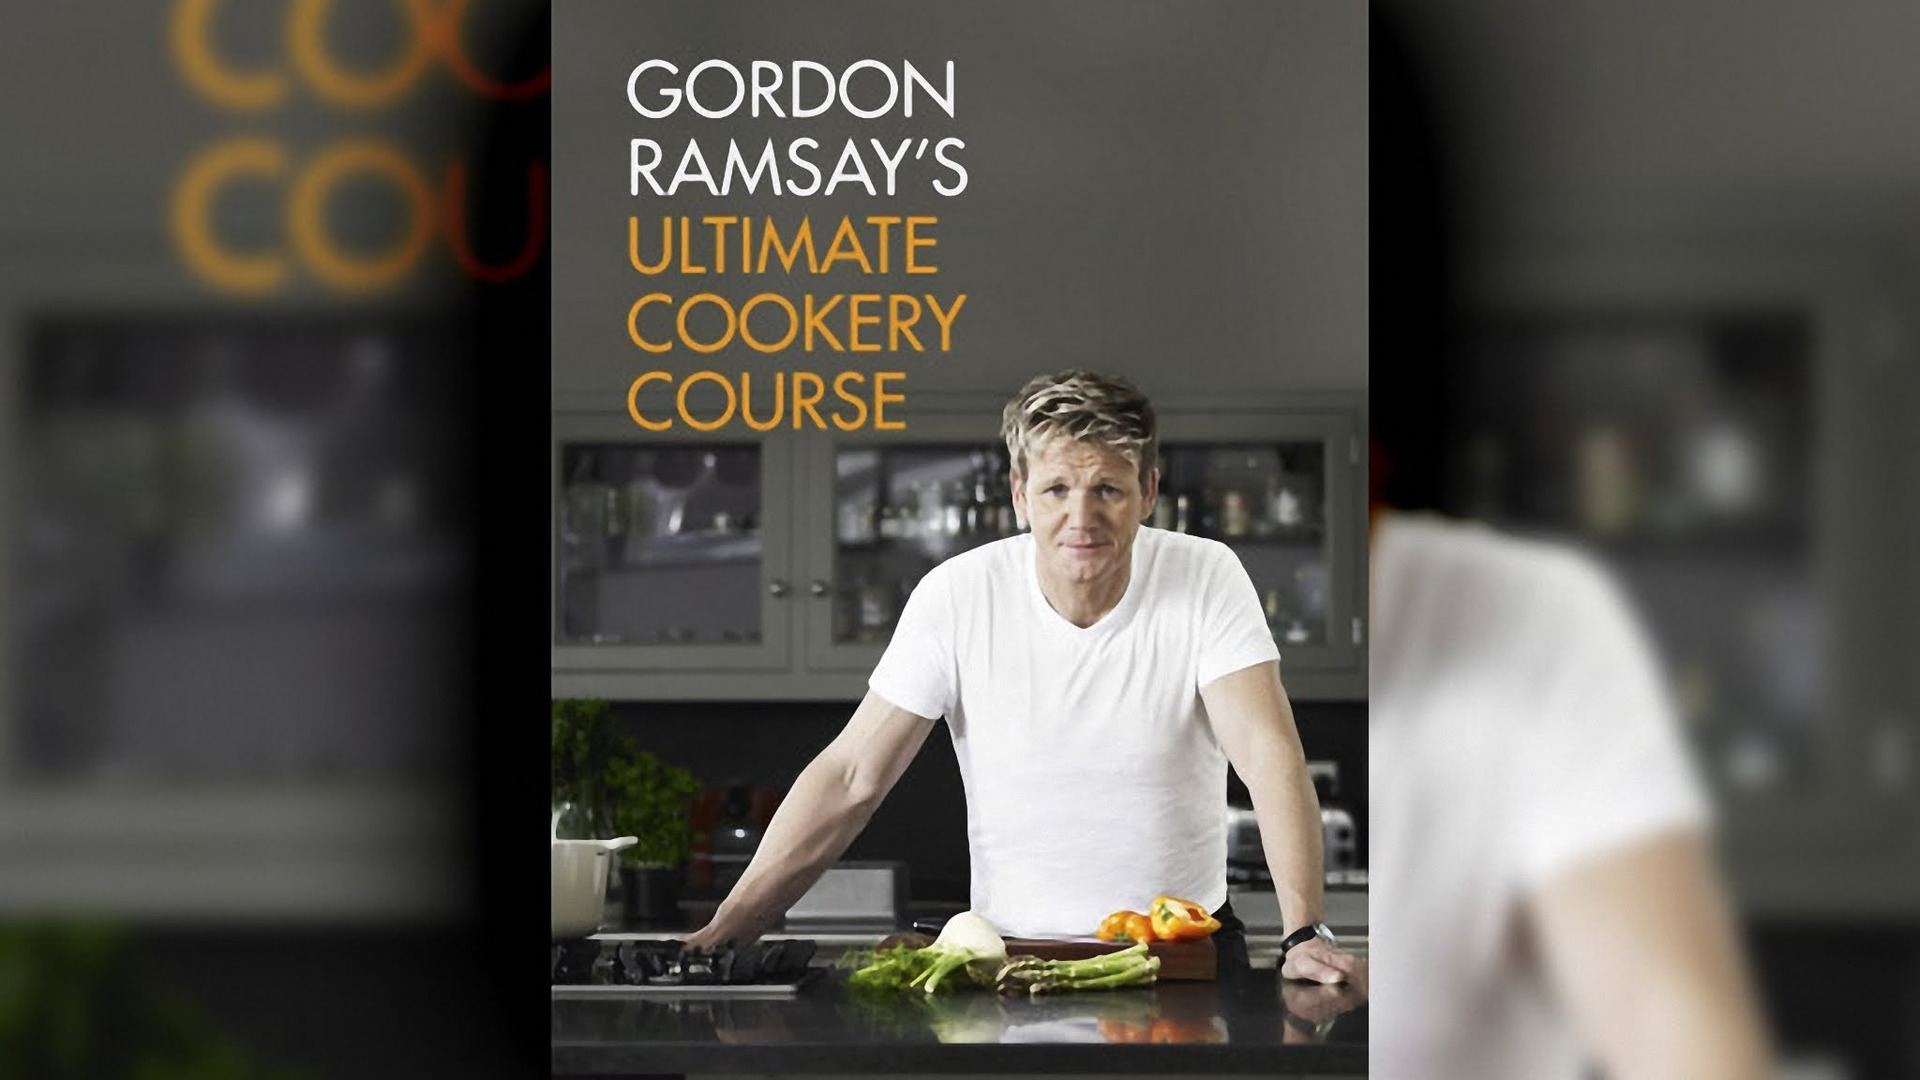 Show Gordon Ramsay's Ultimate Cookery Course